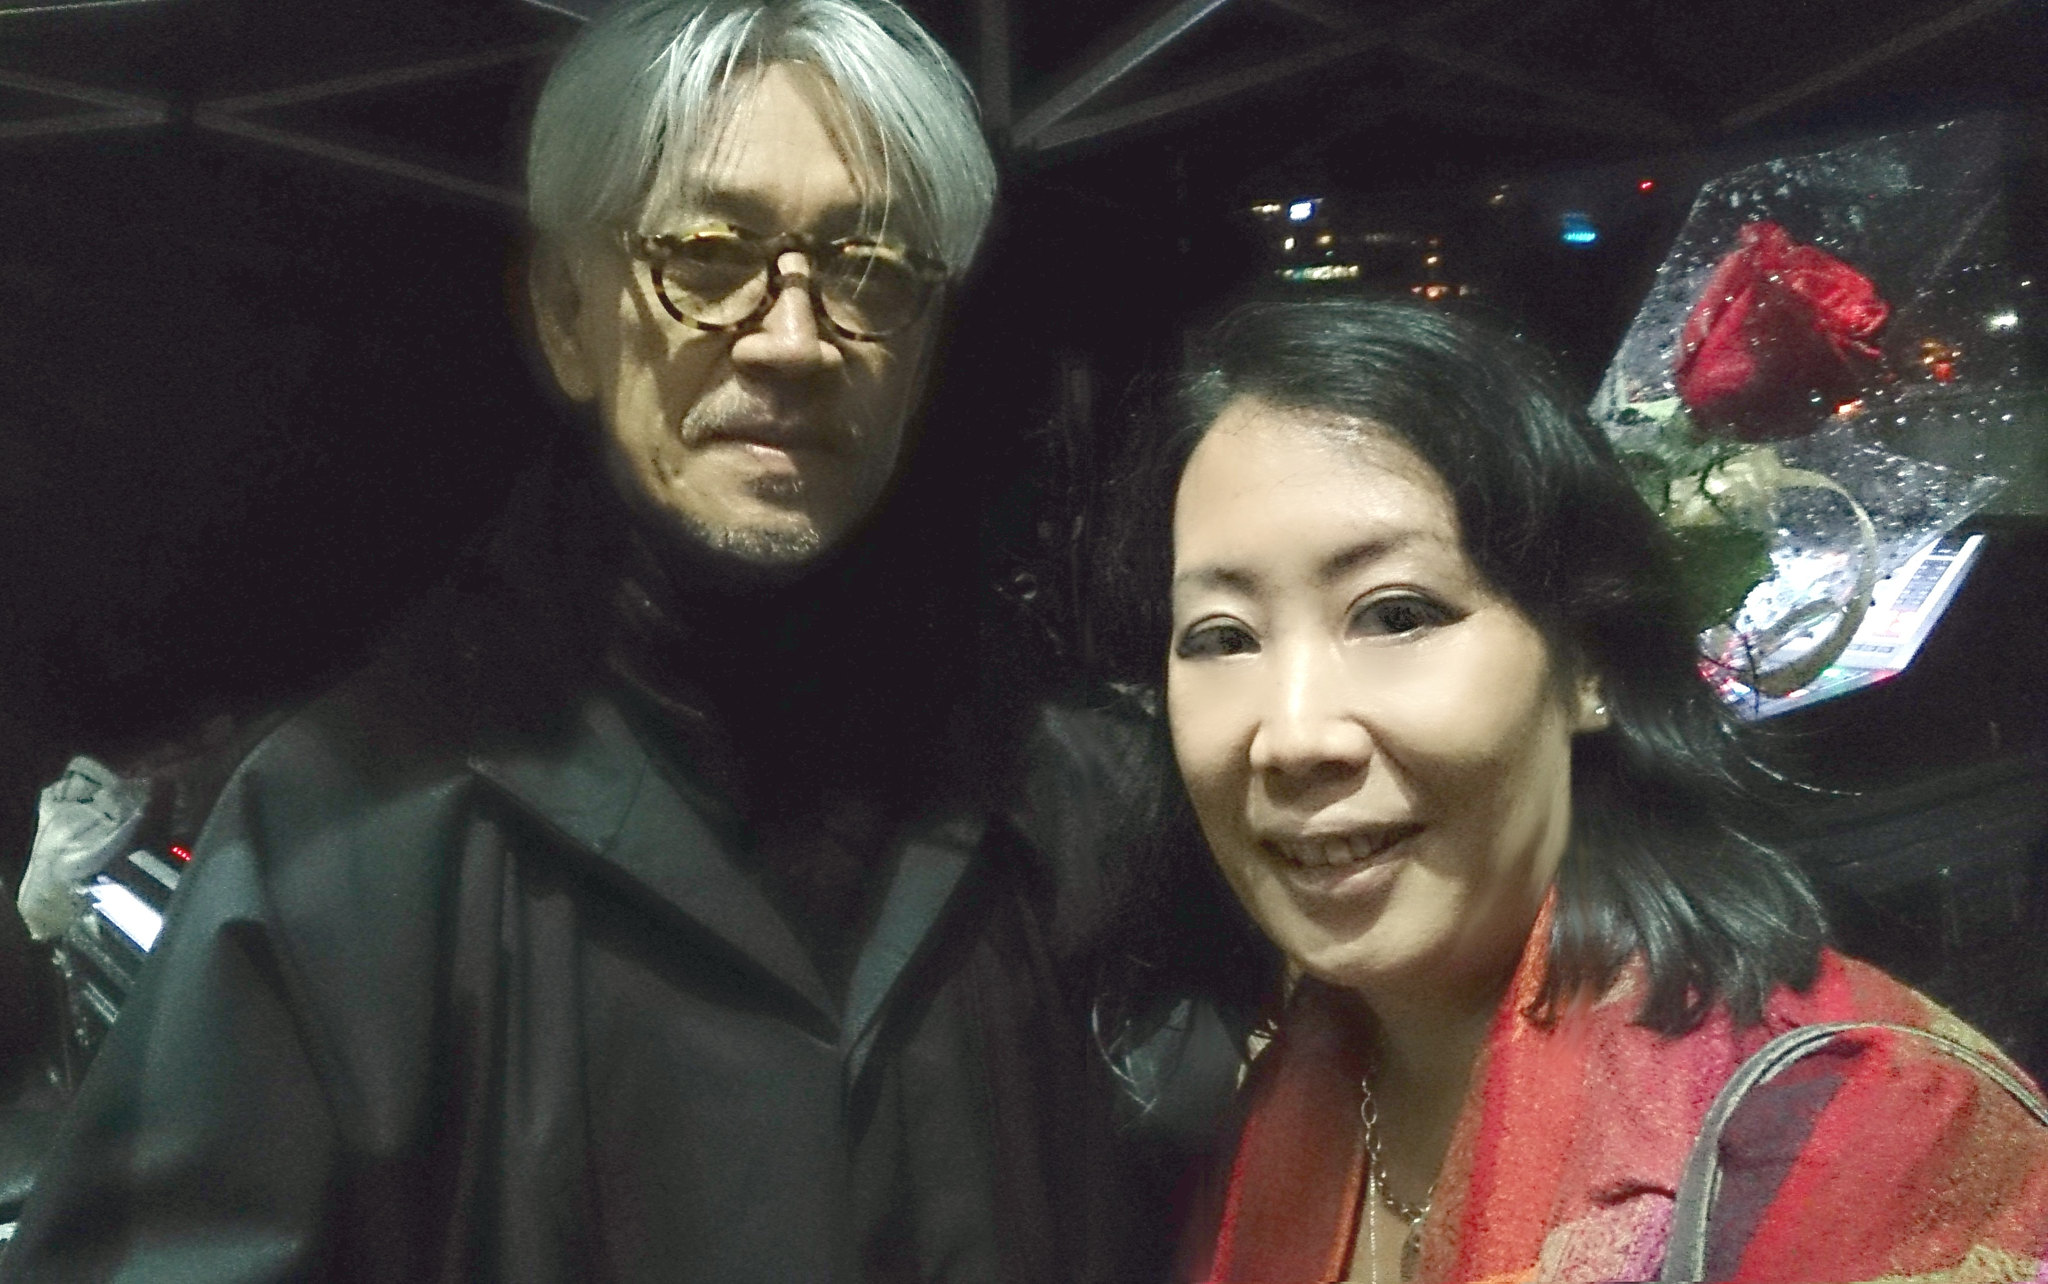 Once in a lifetime moment with my lifetime hero Ryuichi Sakamoto